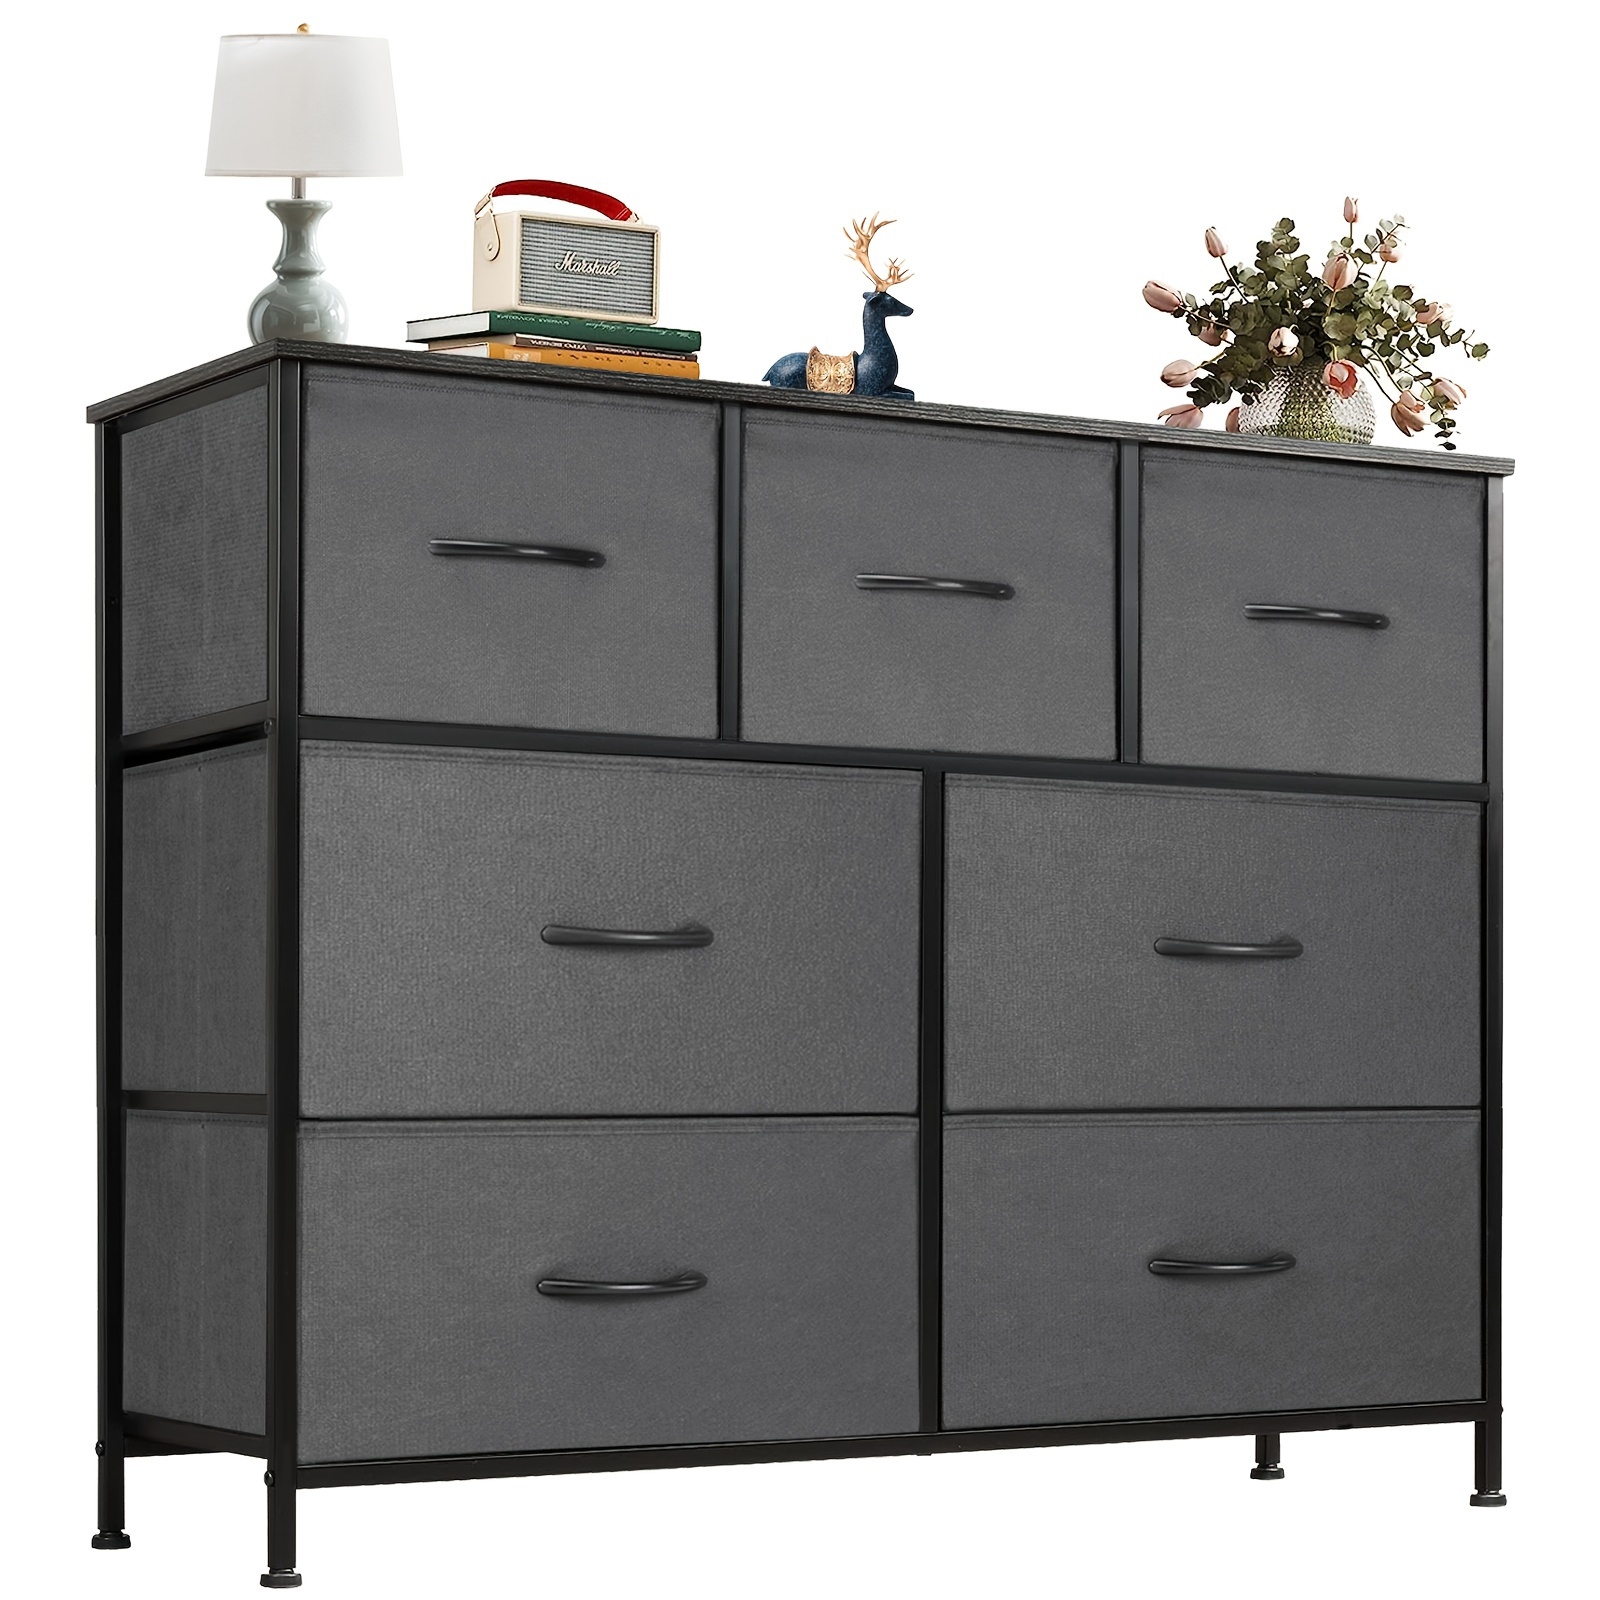 

1pc Dresser For Bedroom With 7 Drawers, Clothes Drawer Fabric Closet Organizer, Cloth Dresser With Metal Frame And Wood Tabletop Storage Cabinet For Room, Nursery, Living Room, Entryway Home Supplies